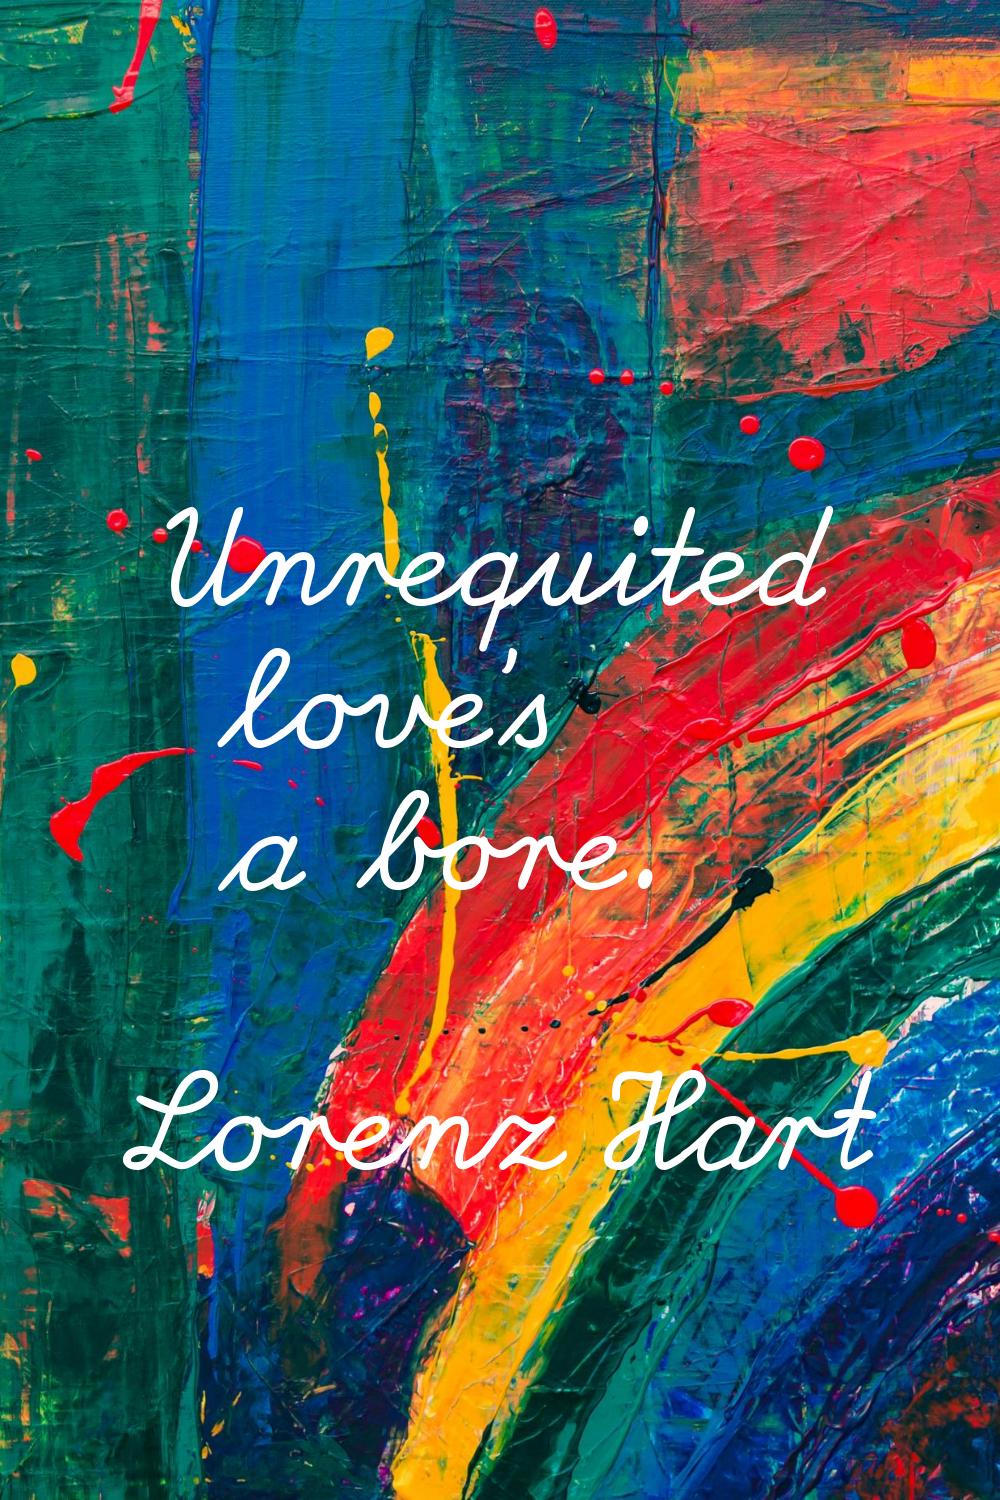 Unrequited love's a bore.